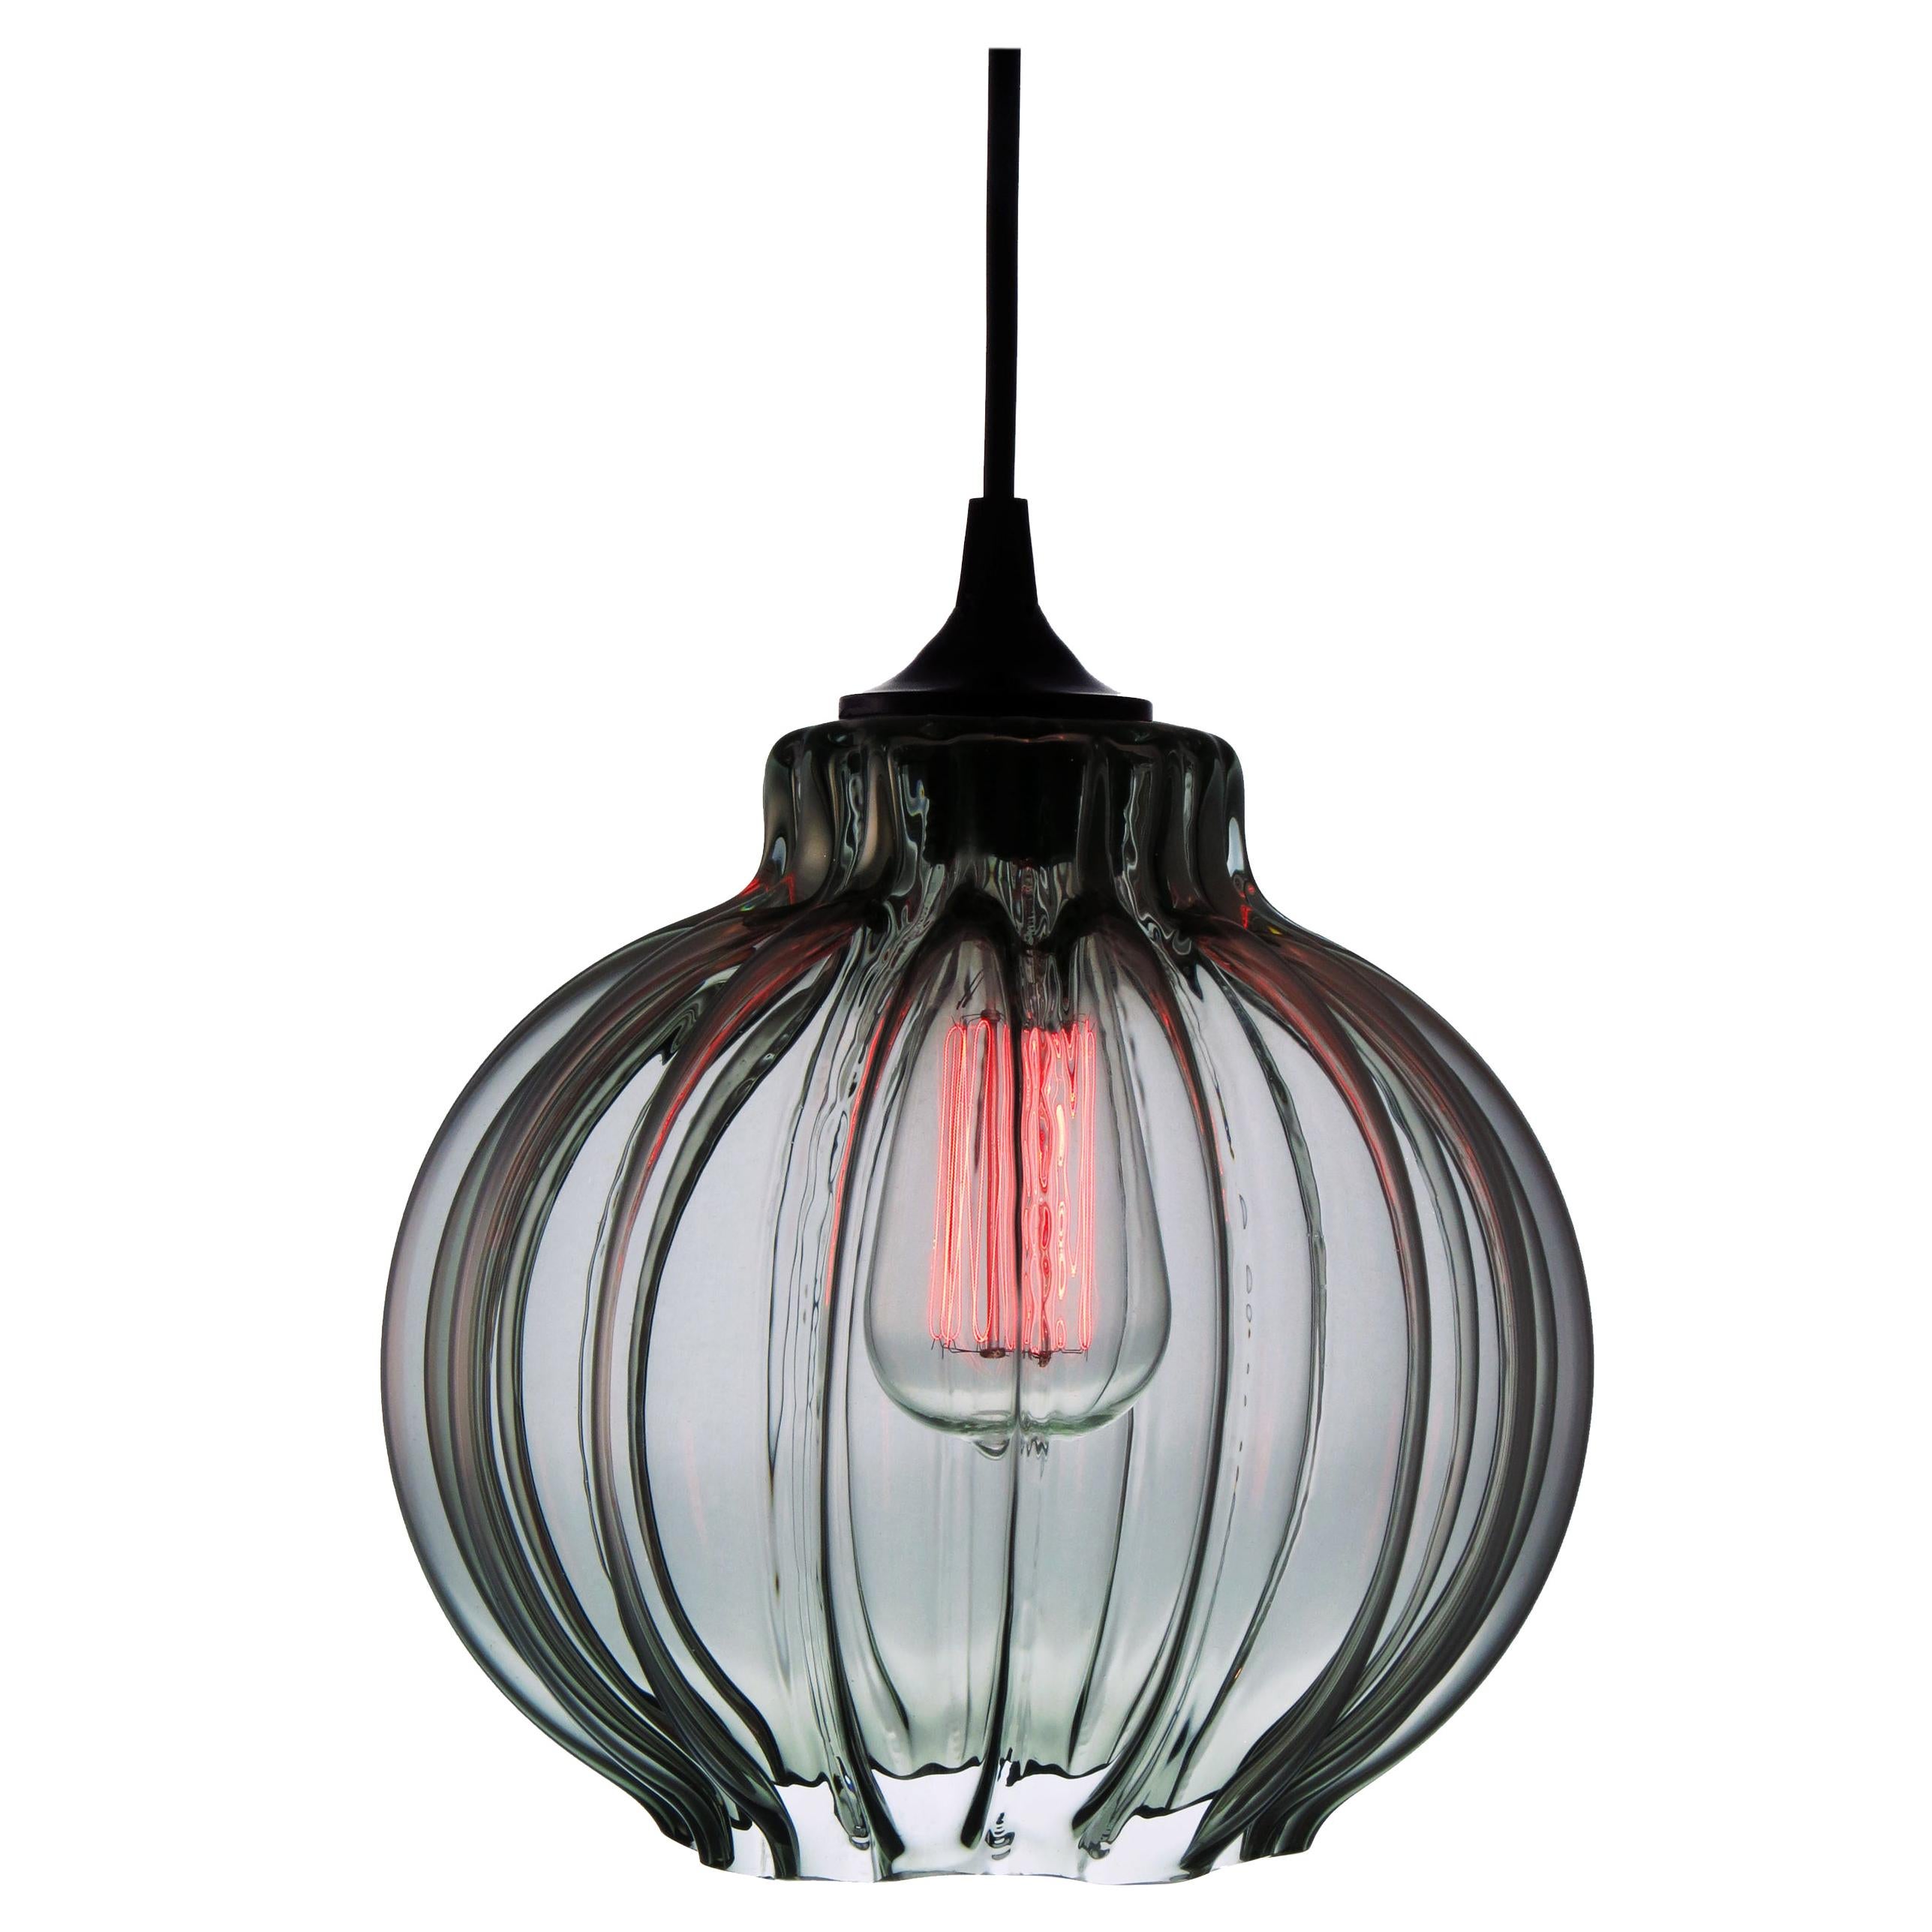 Tamala Contemporary Hand Blown Pendant Lamp in Smokey Gray, Limited Series For Sale